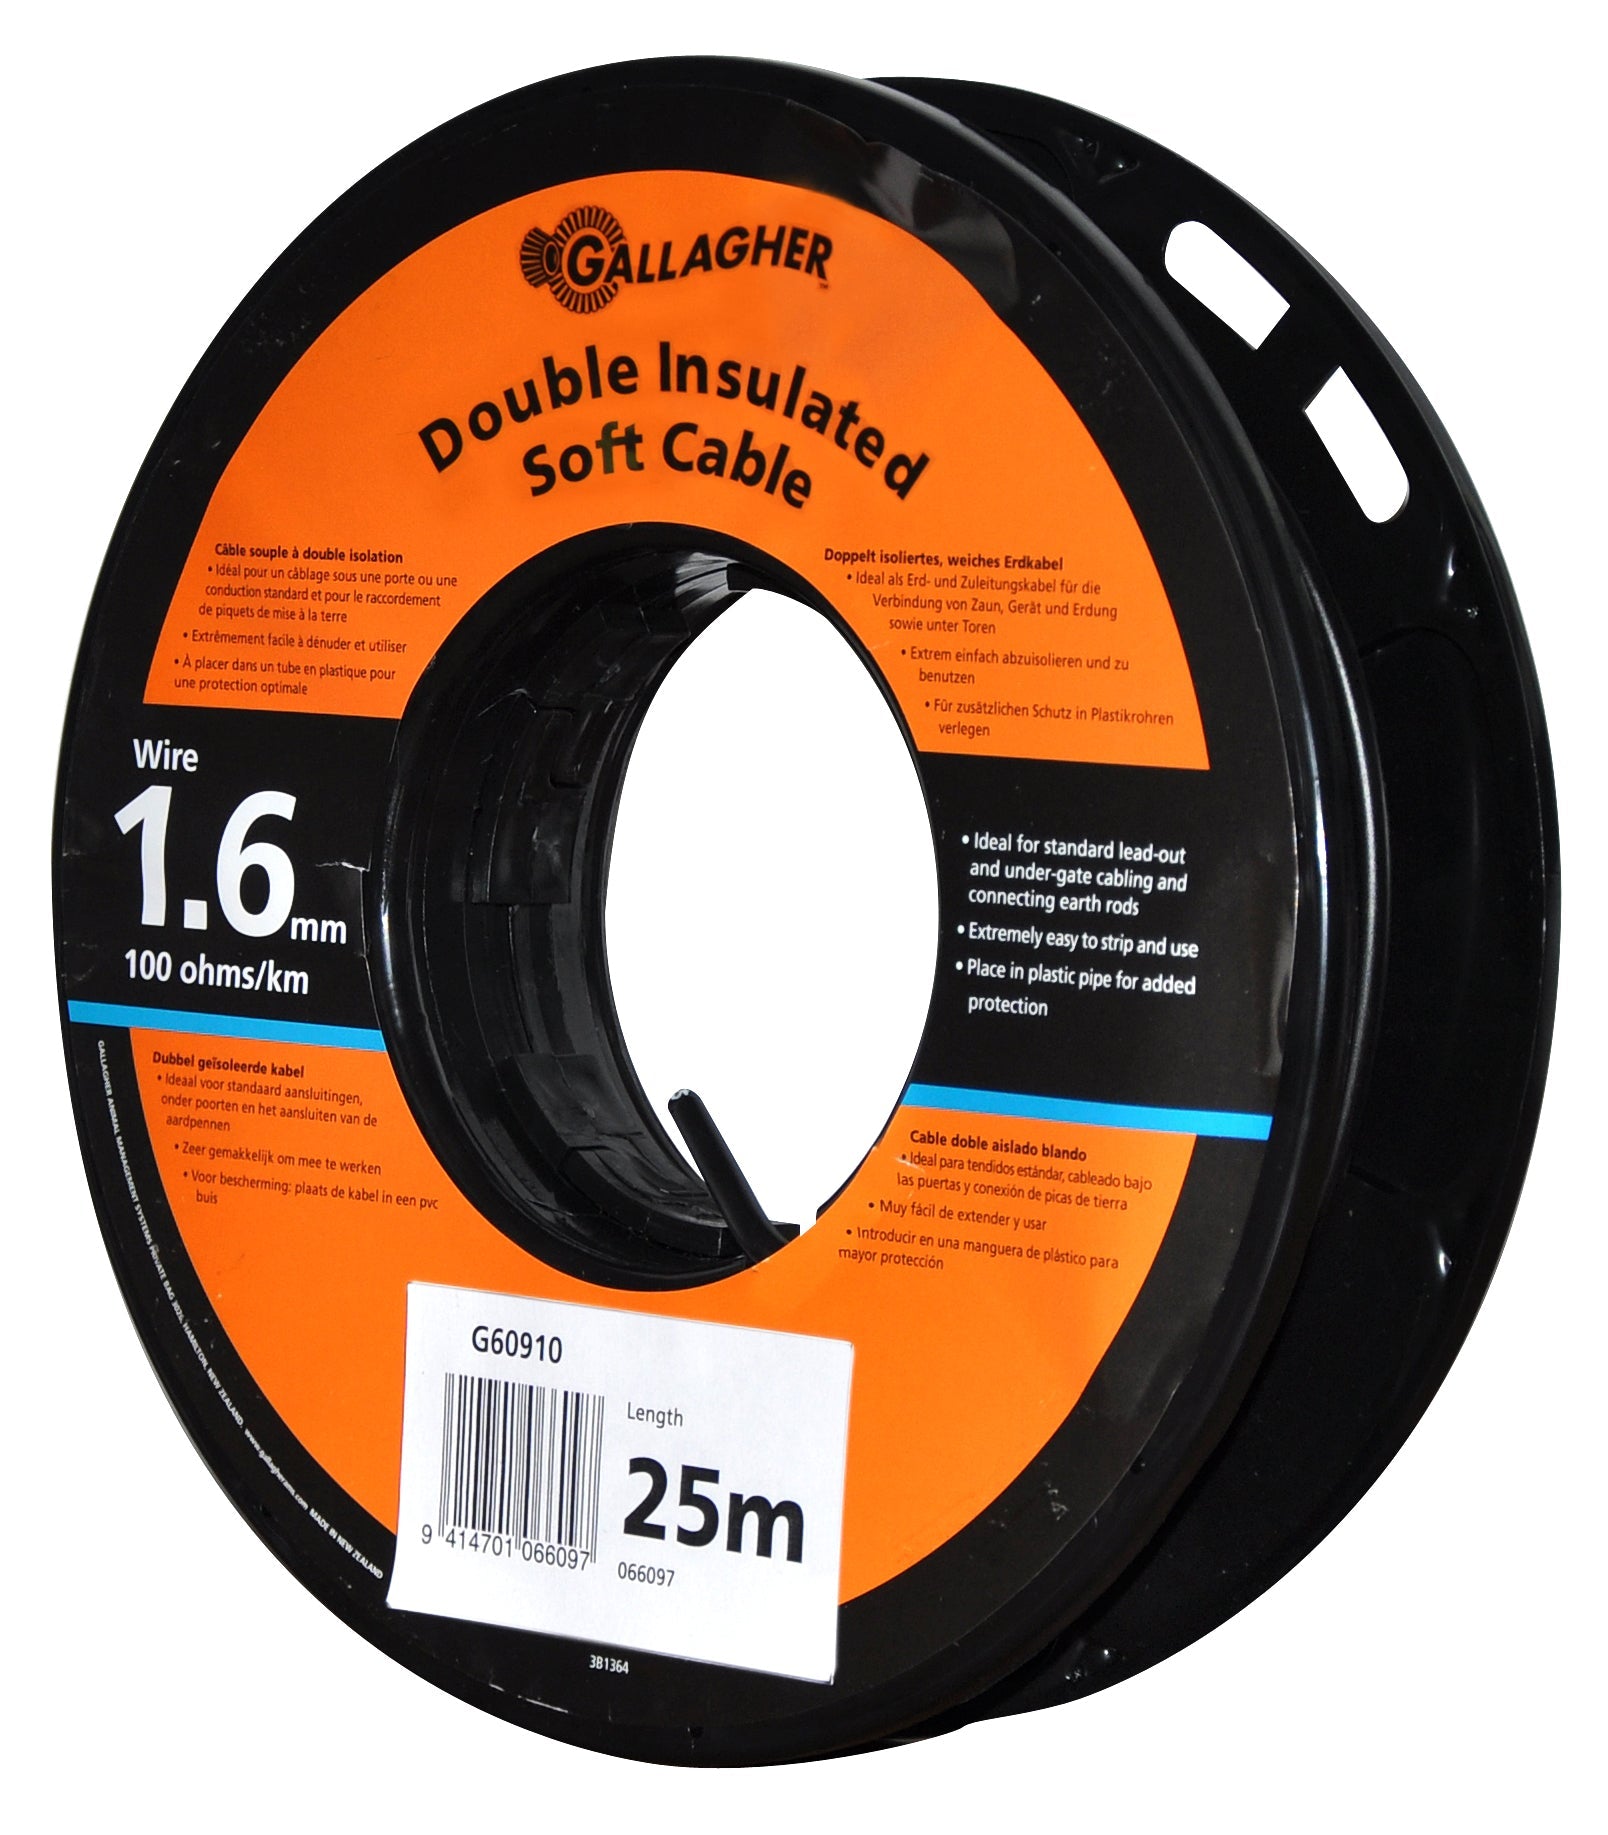 Lead out cable 1,6mm 25m 100 Ohm/km